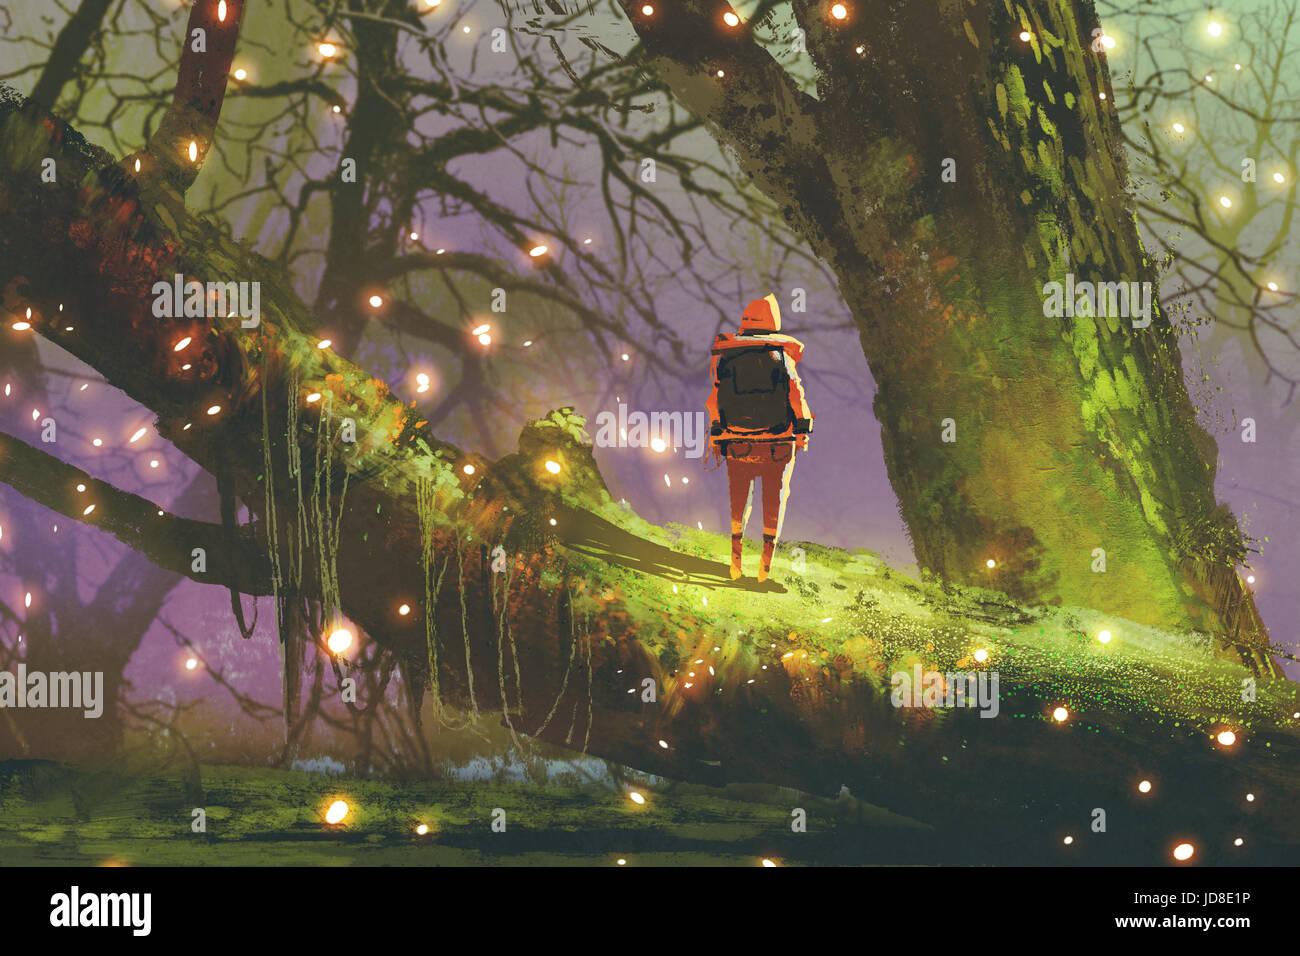 Hiker With Backpack Standing On Giant Tree With Fireflies In Enchanted Forest Digital Art Style Illustration Painting Stock Photo Alamy